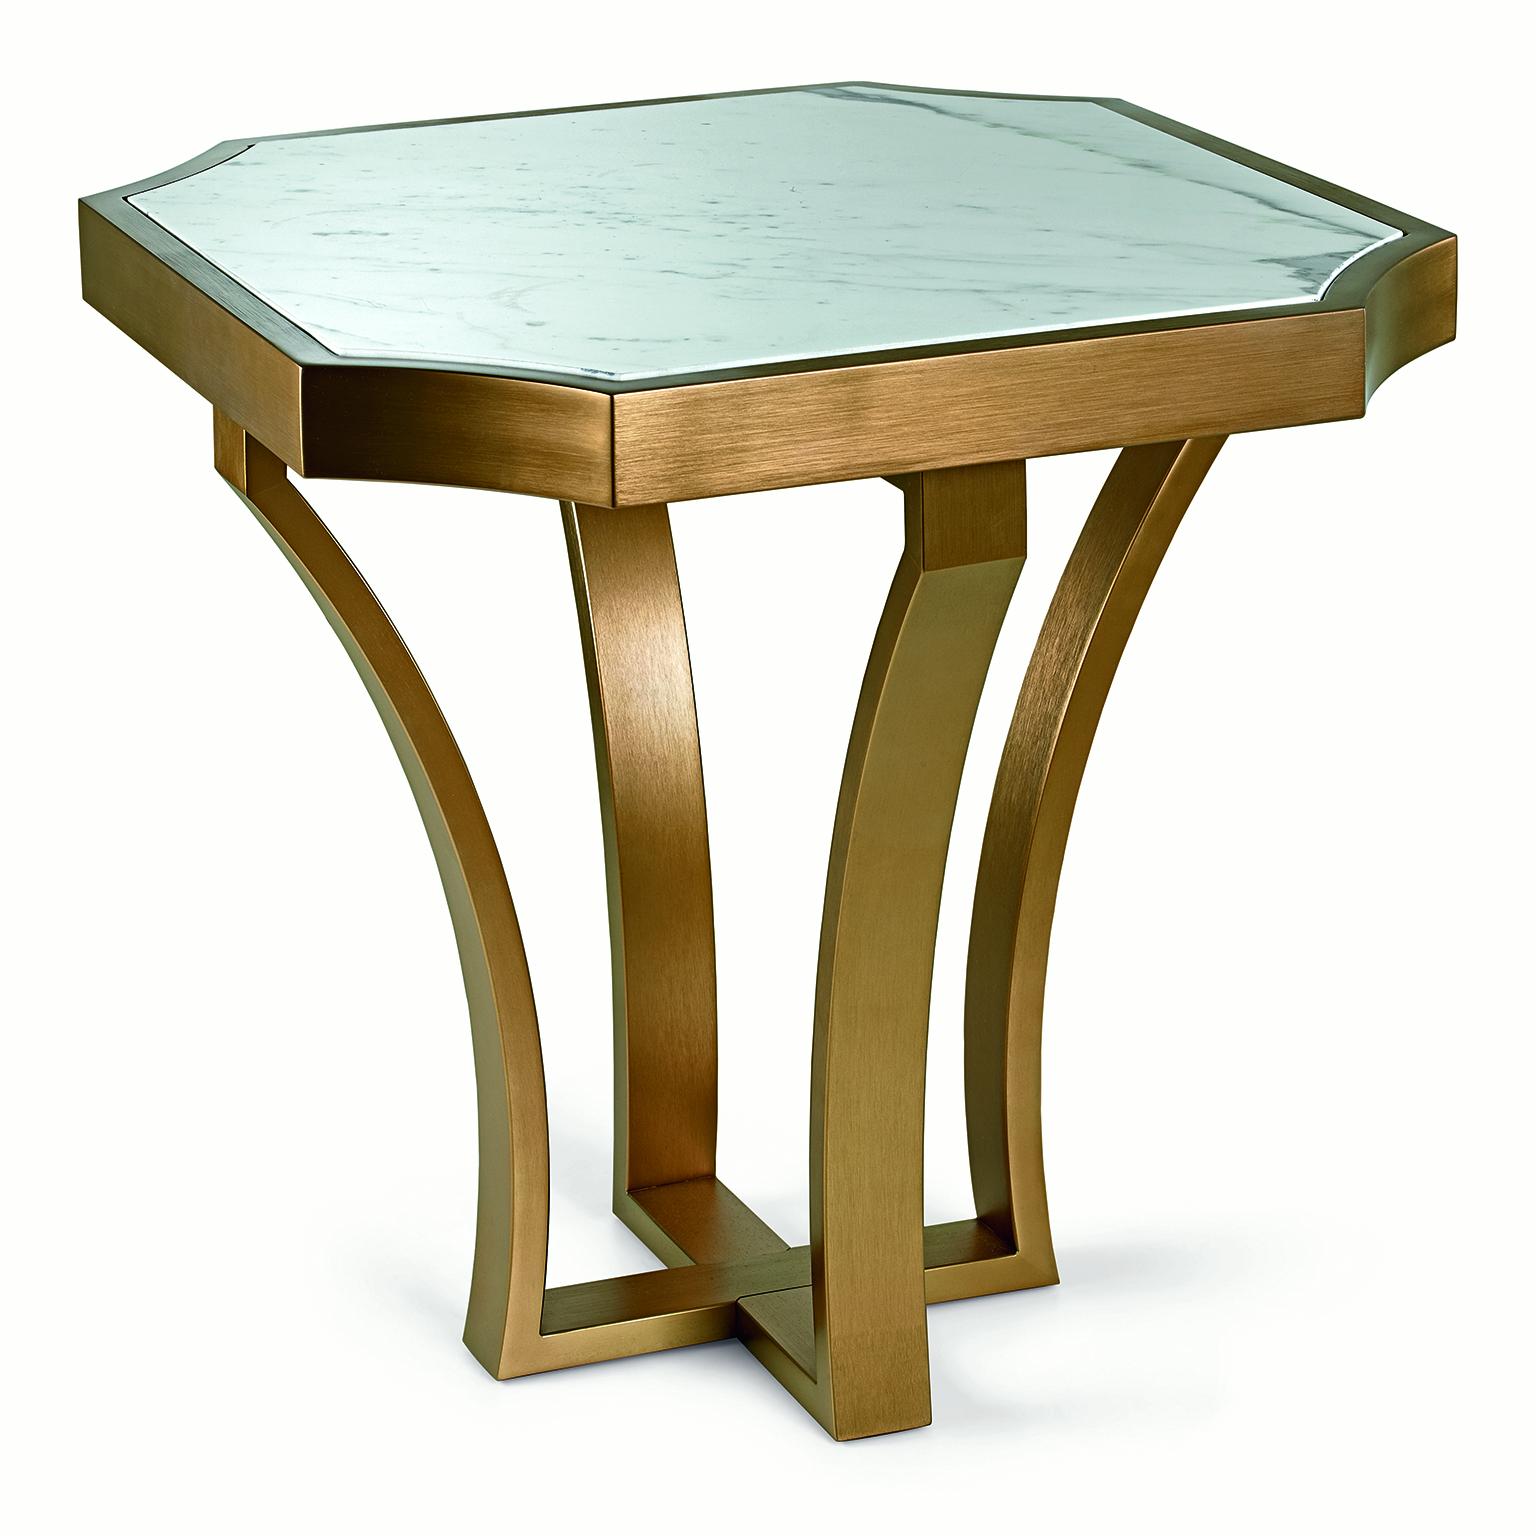 Modern Coffee with Table Metal Frame Distressed Paint Finish Top Calacatta Gold Marble For Sale